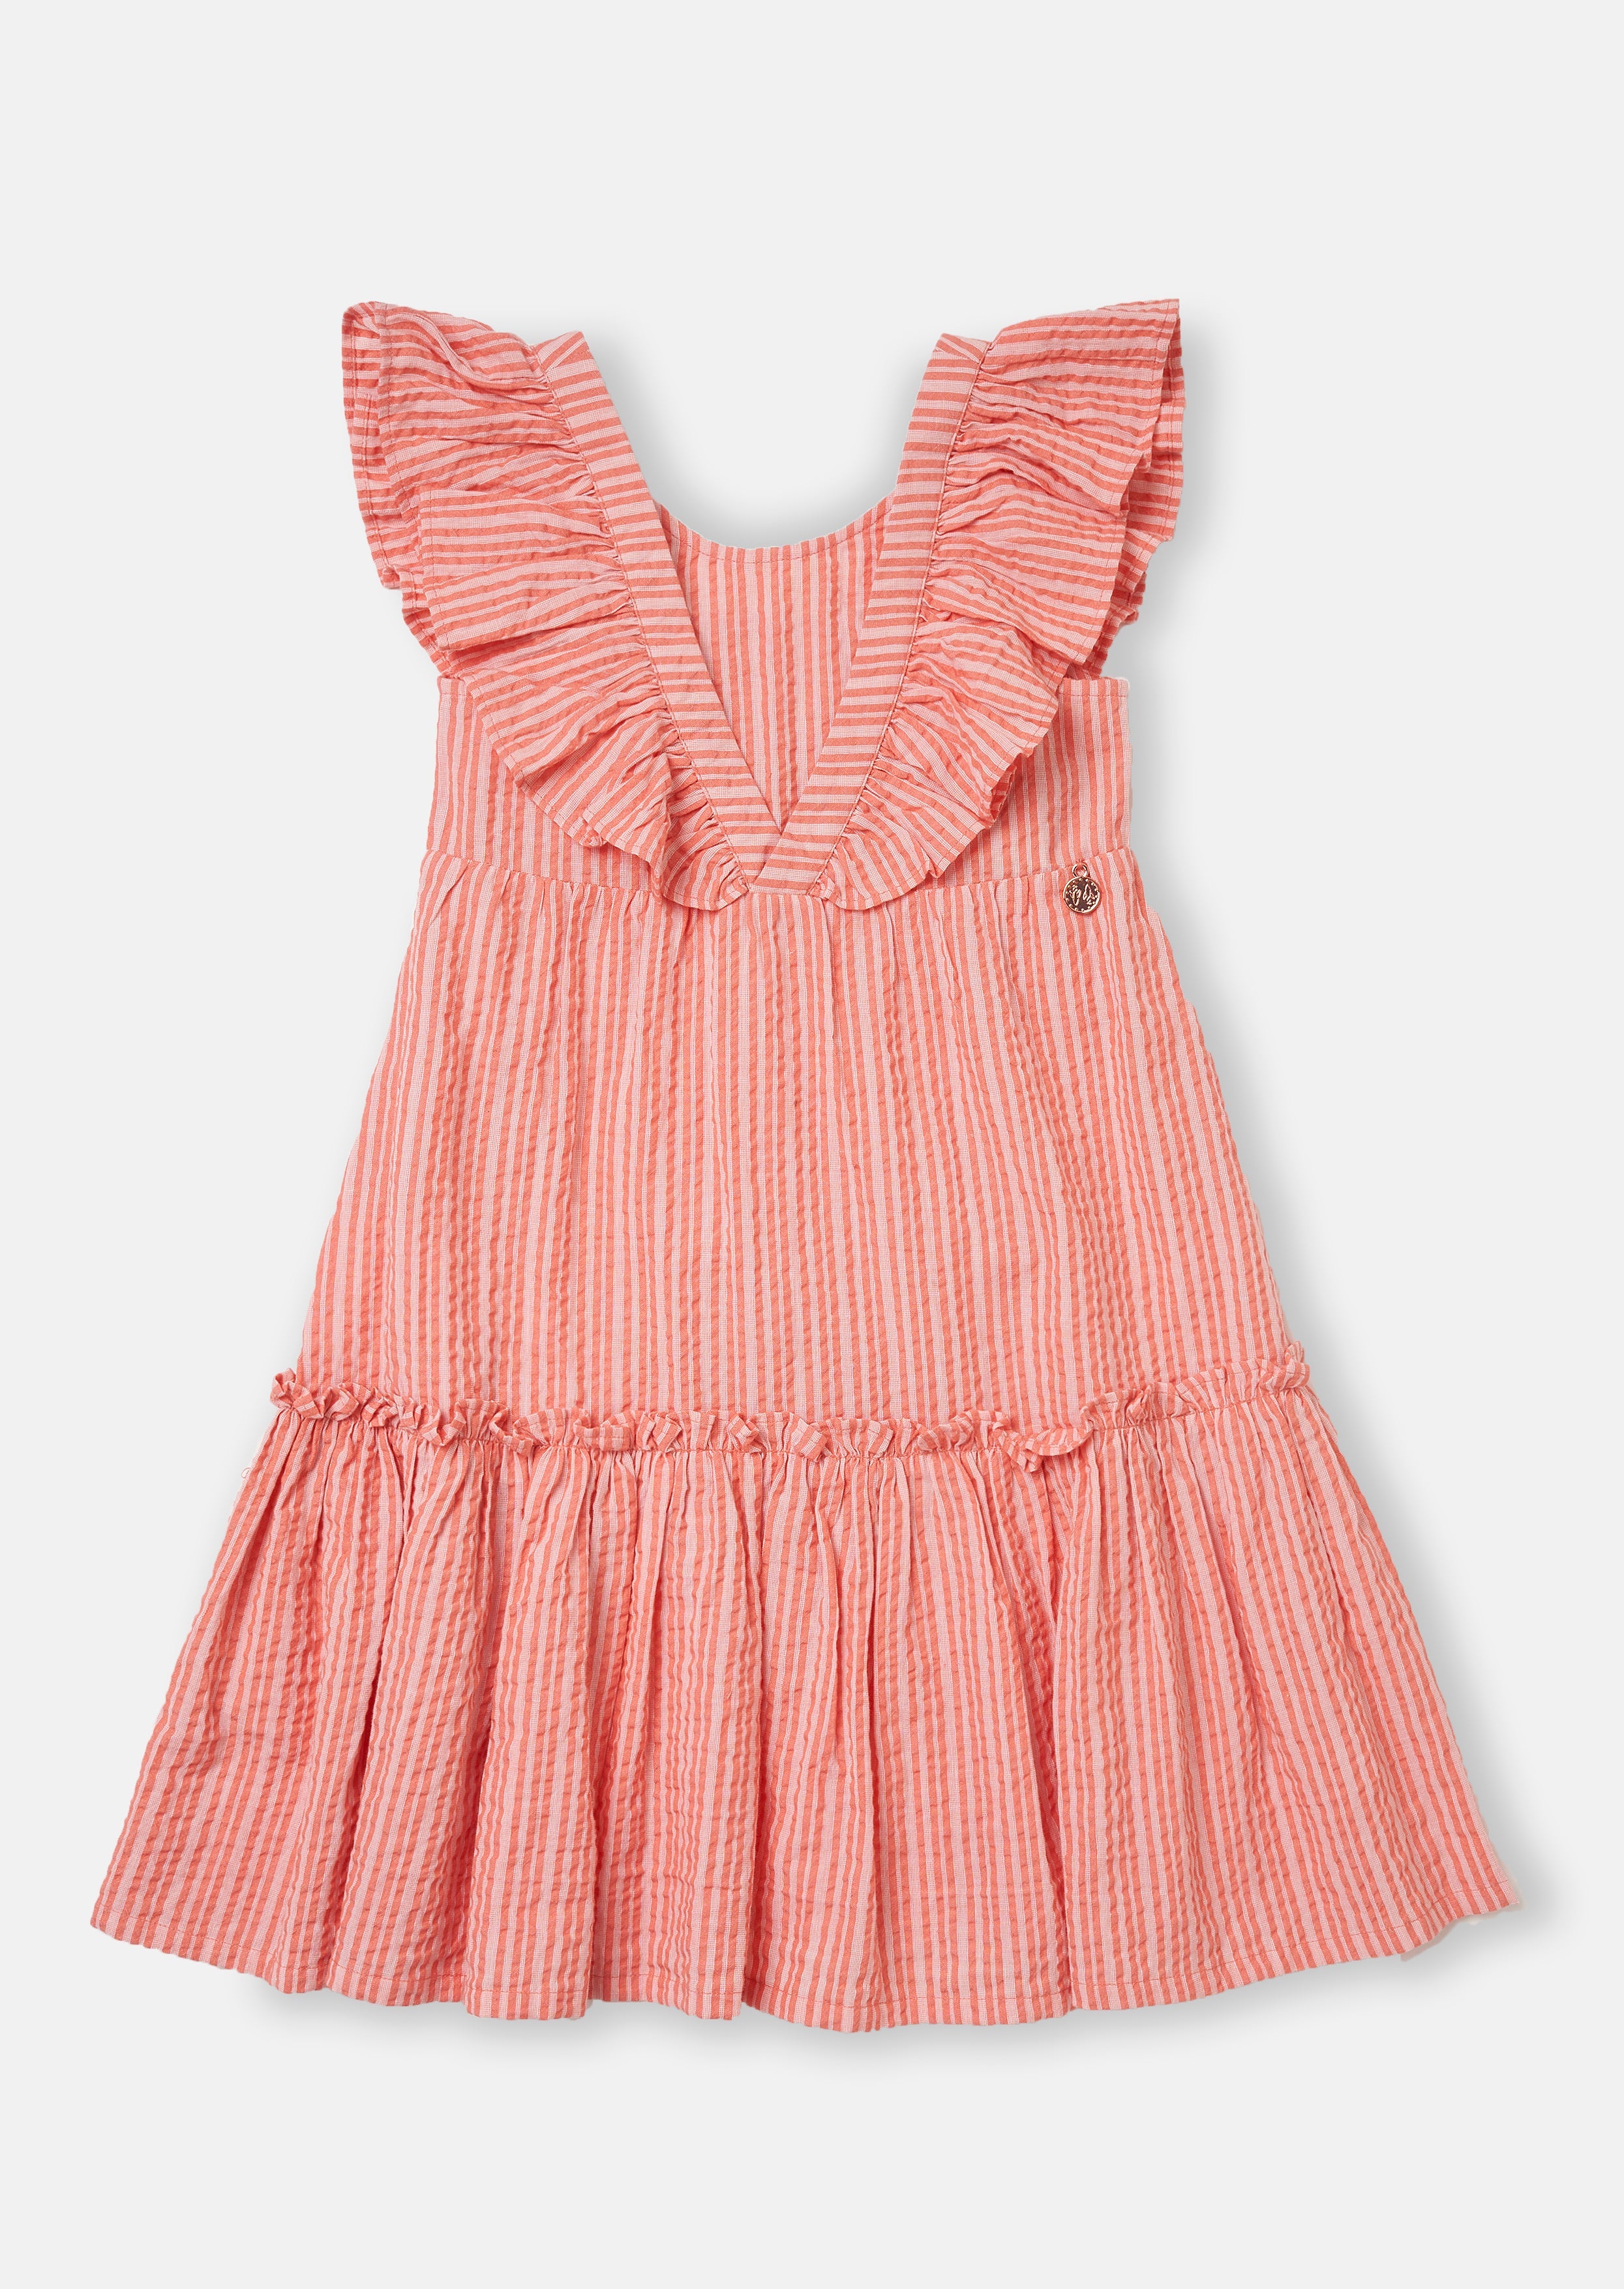 Buy J.K MODEL DRESSES Girls Cotton Linen Casual Midi Dress (Pink, 2-3  Years) (D20) at Amazon.in